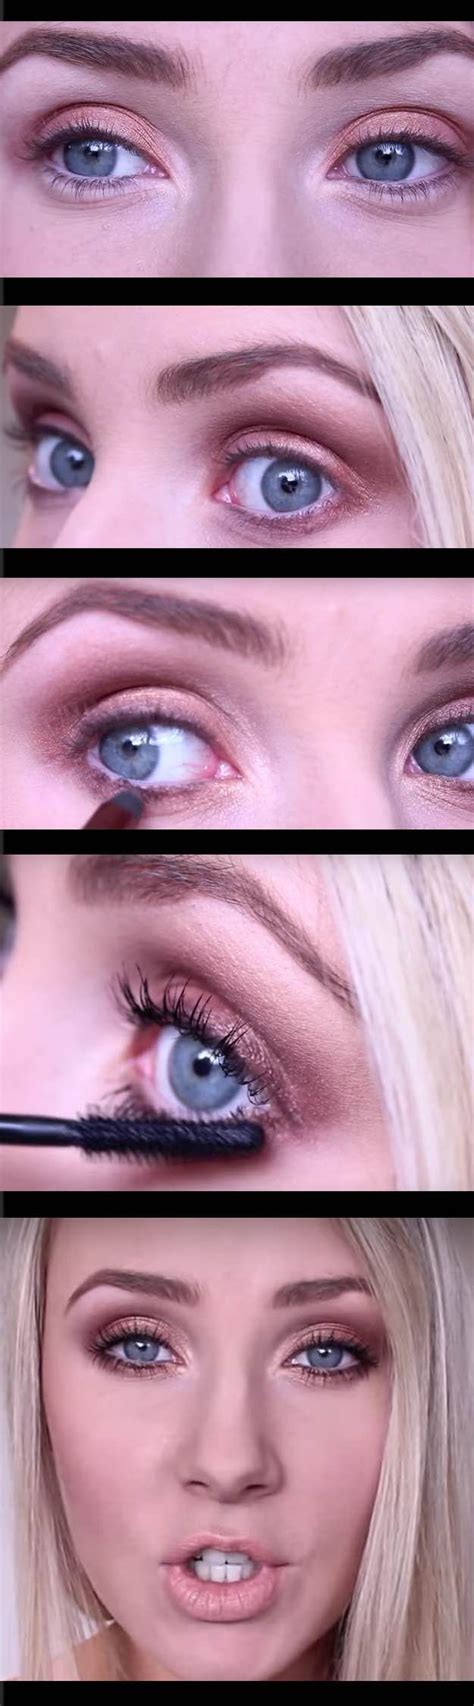 Makeup Tutorials For Blue Eyes How To Make Blue Eyes Pop Easy Step By